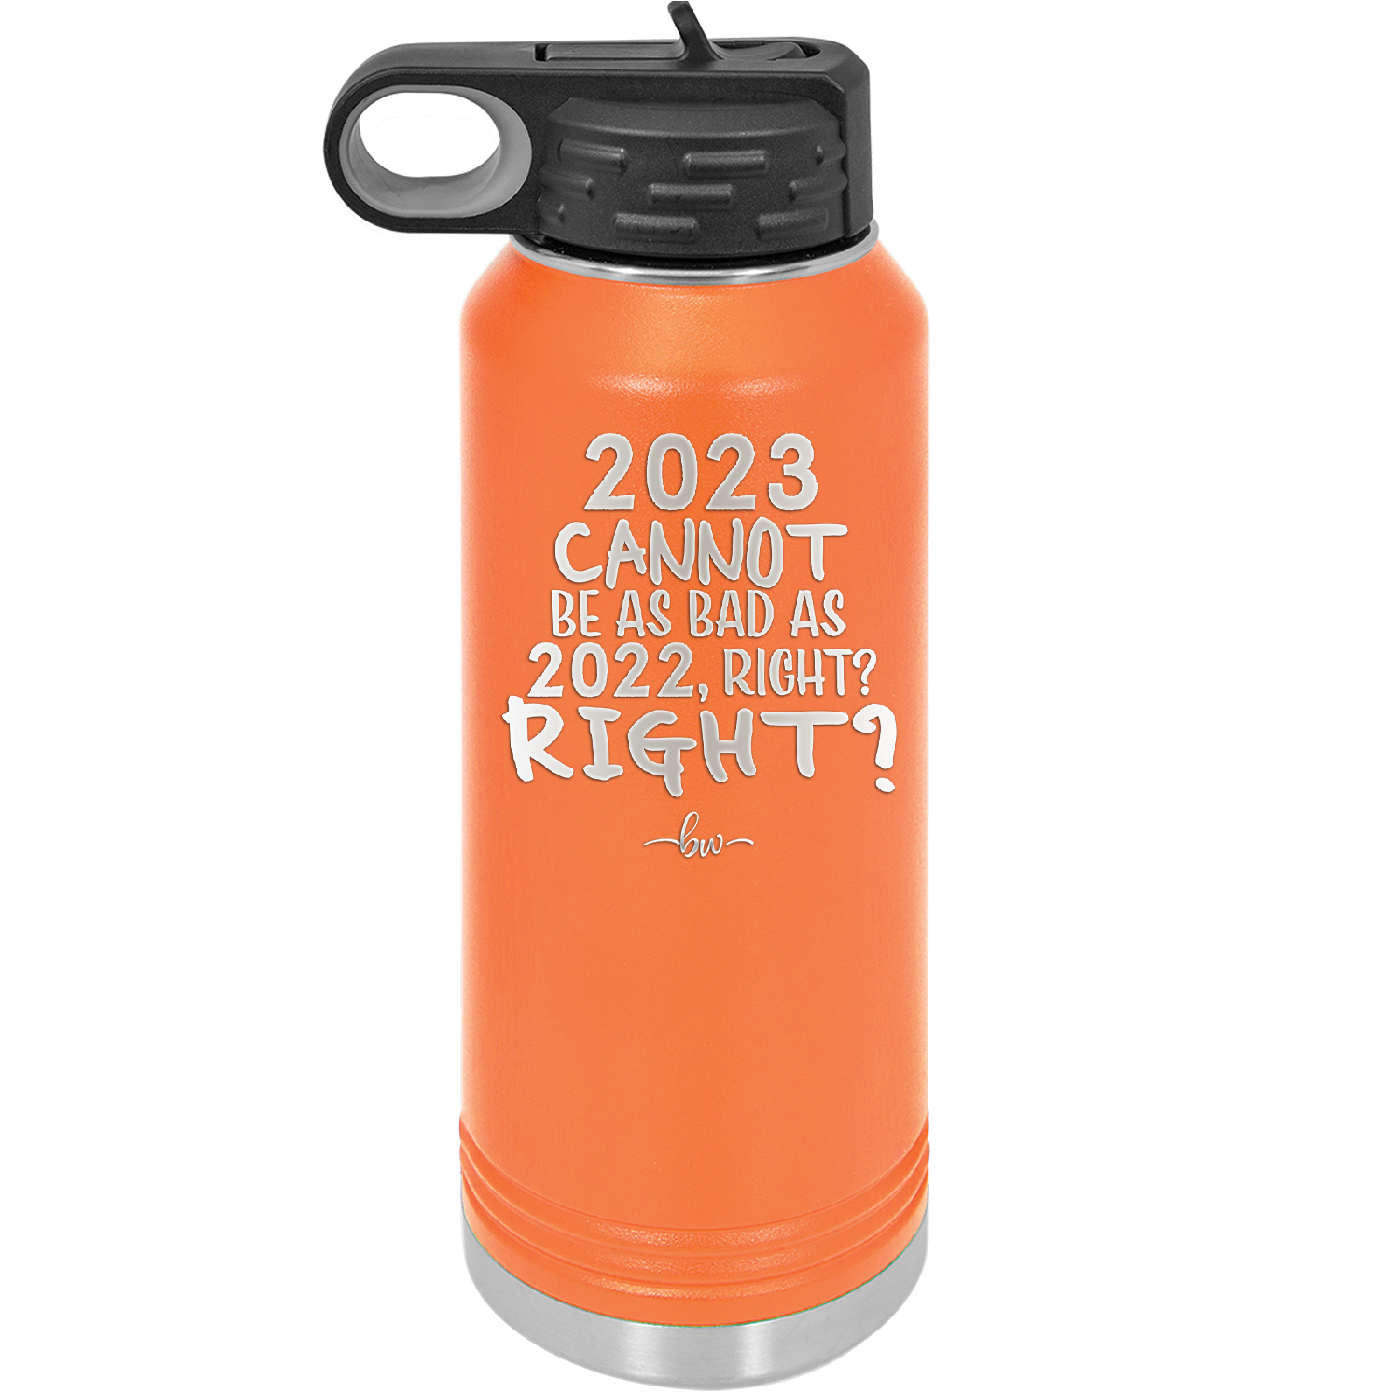 32 oz water bottle 2023 cannot be as bas as 2022, right?right? - orange